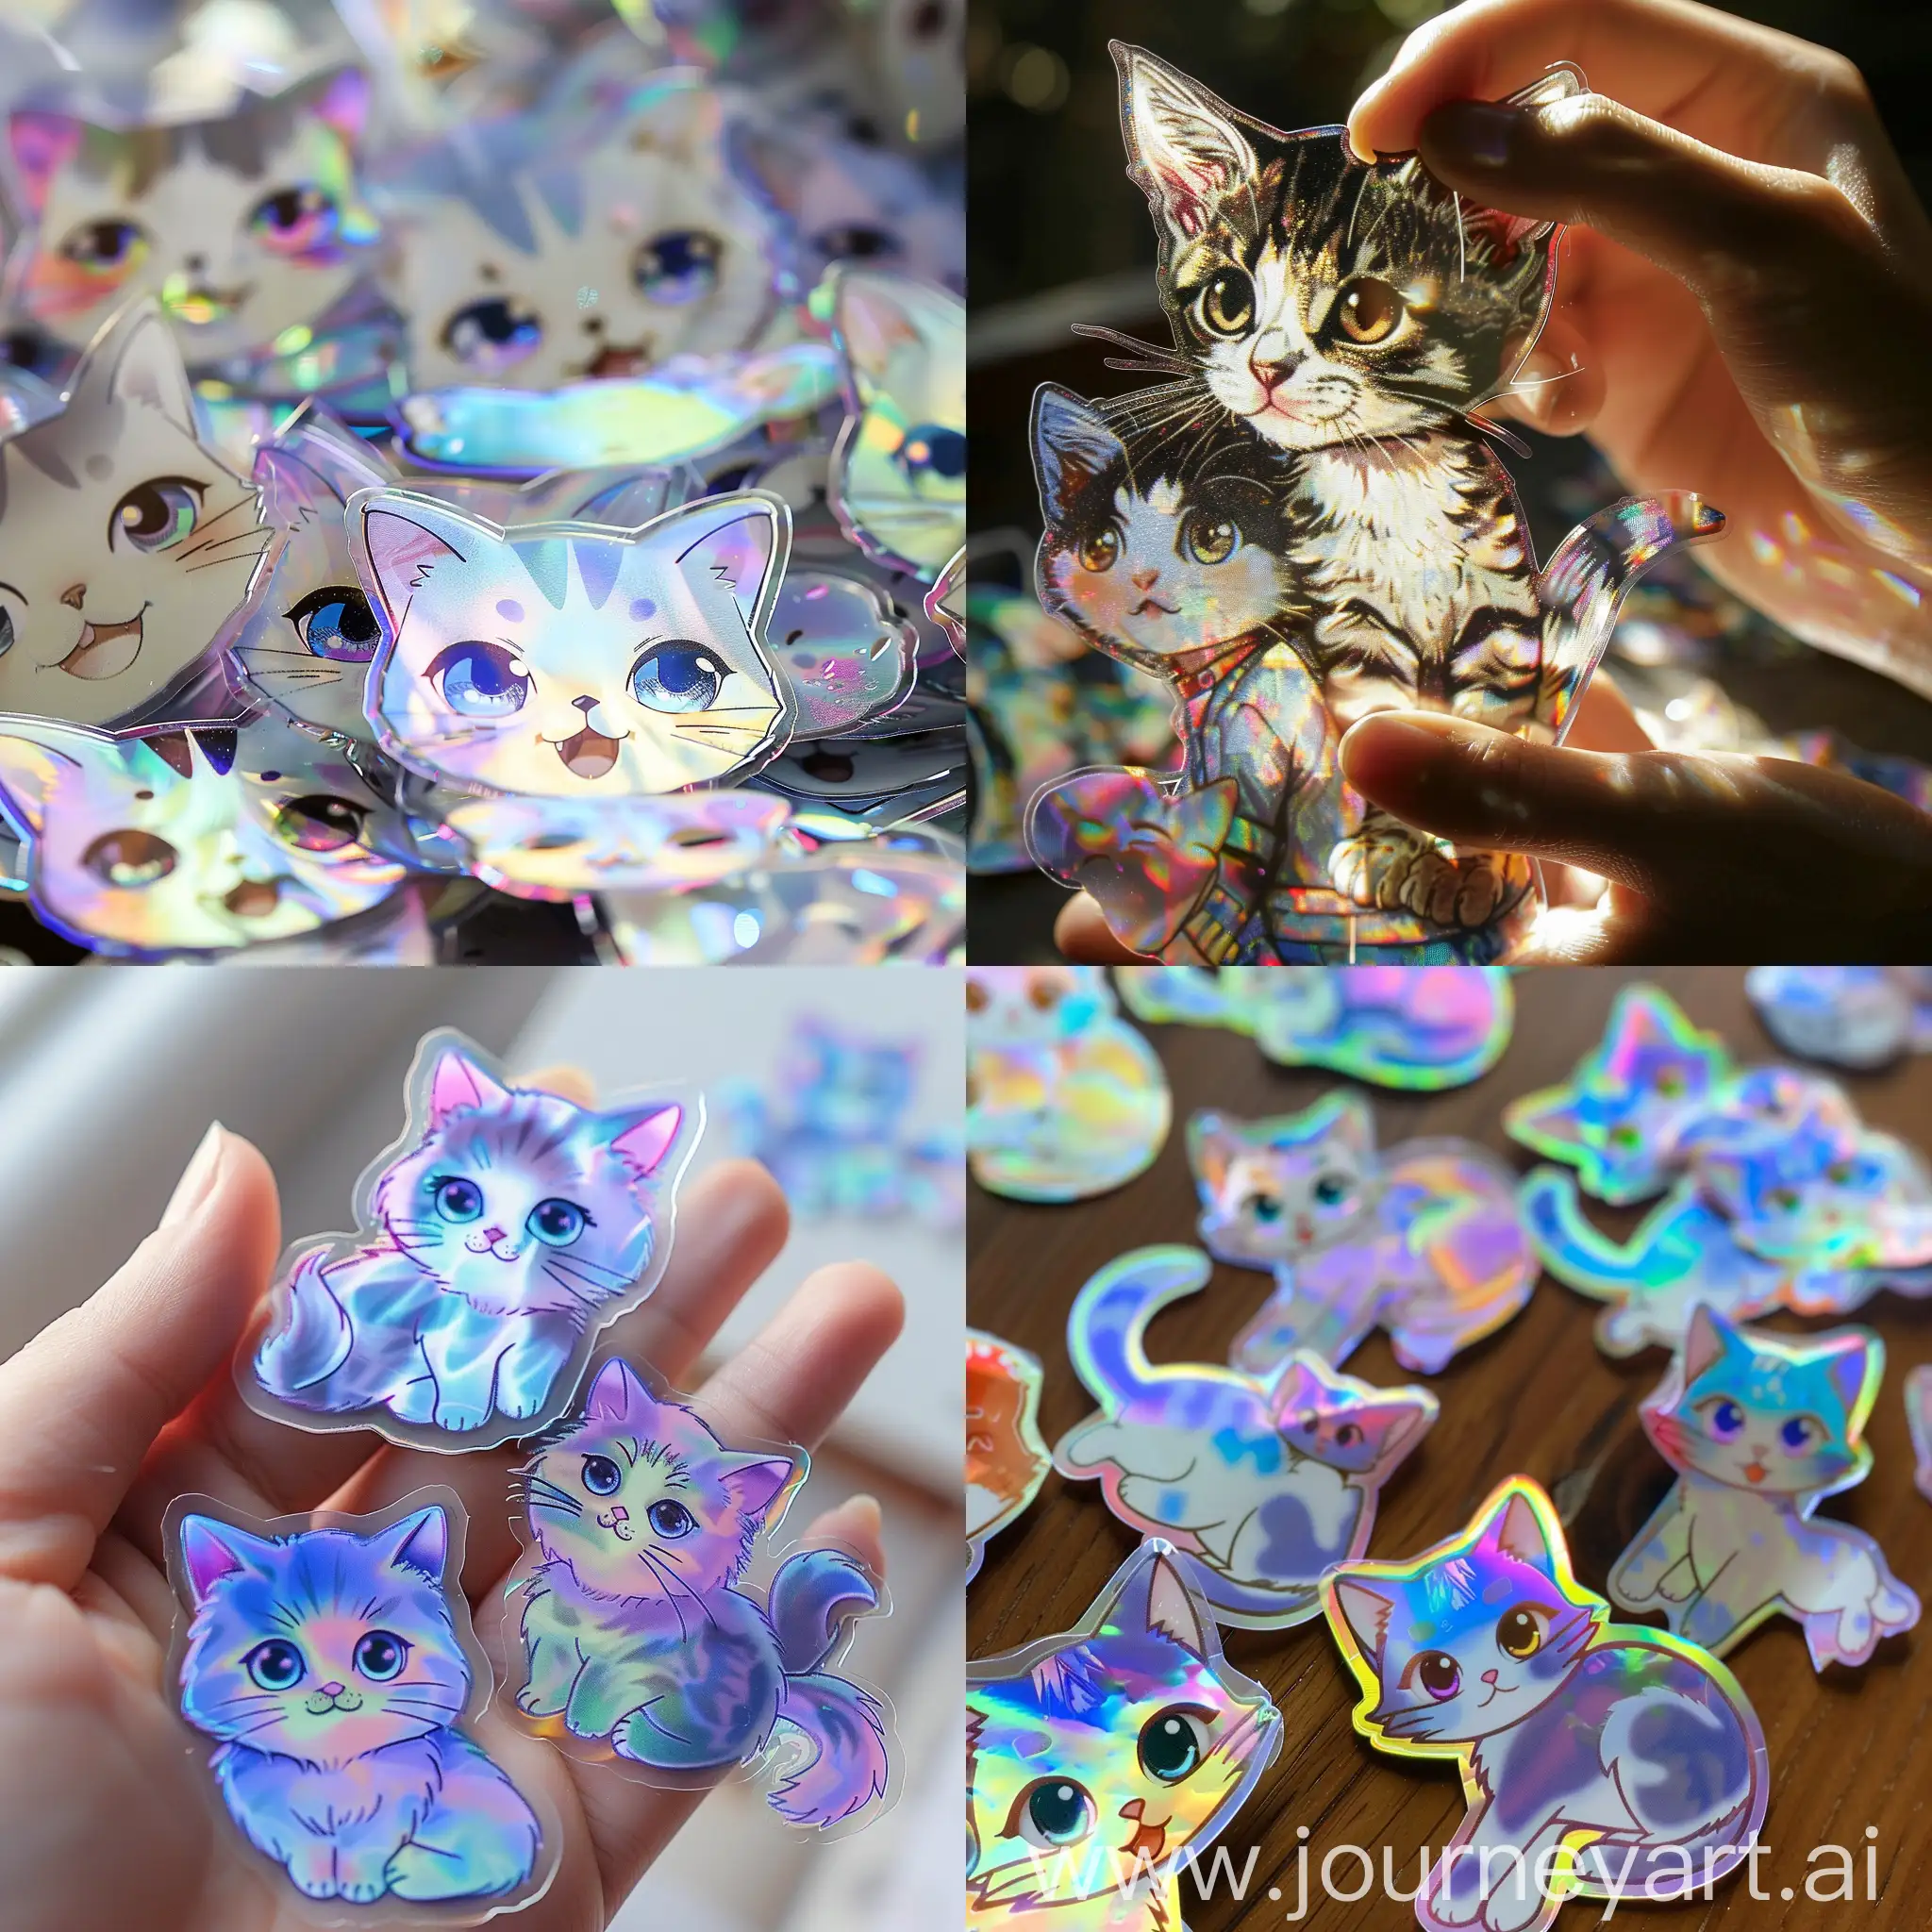 Adorable-Kittens-Creating-AnimeStyle-Holographic-Stickers